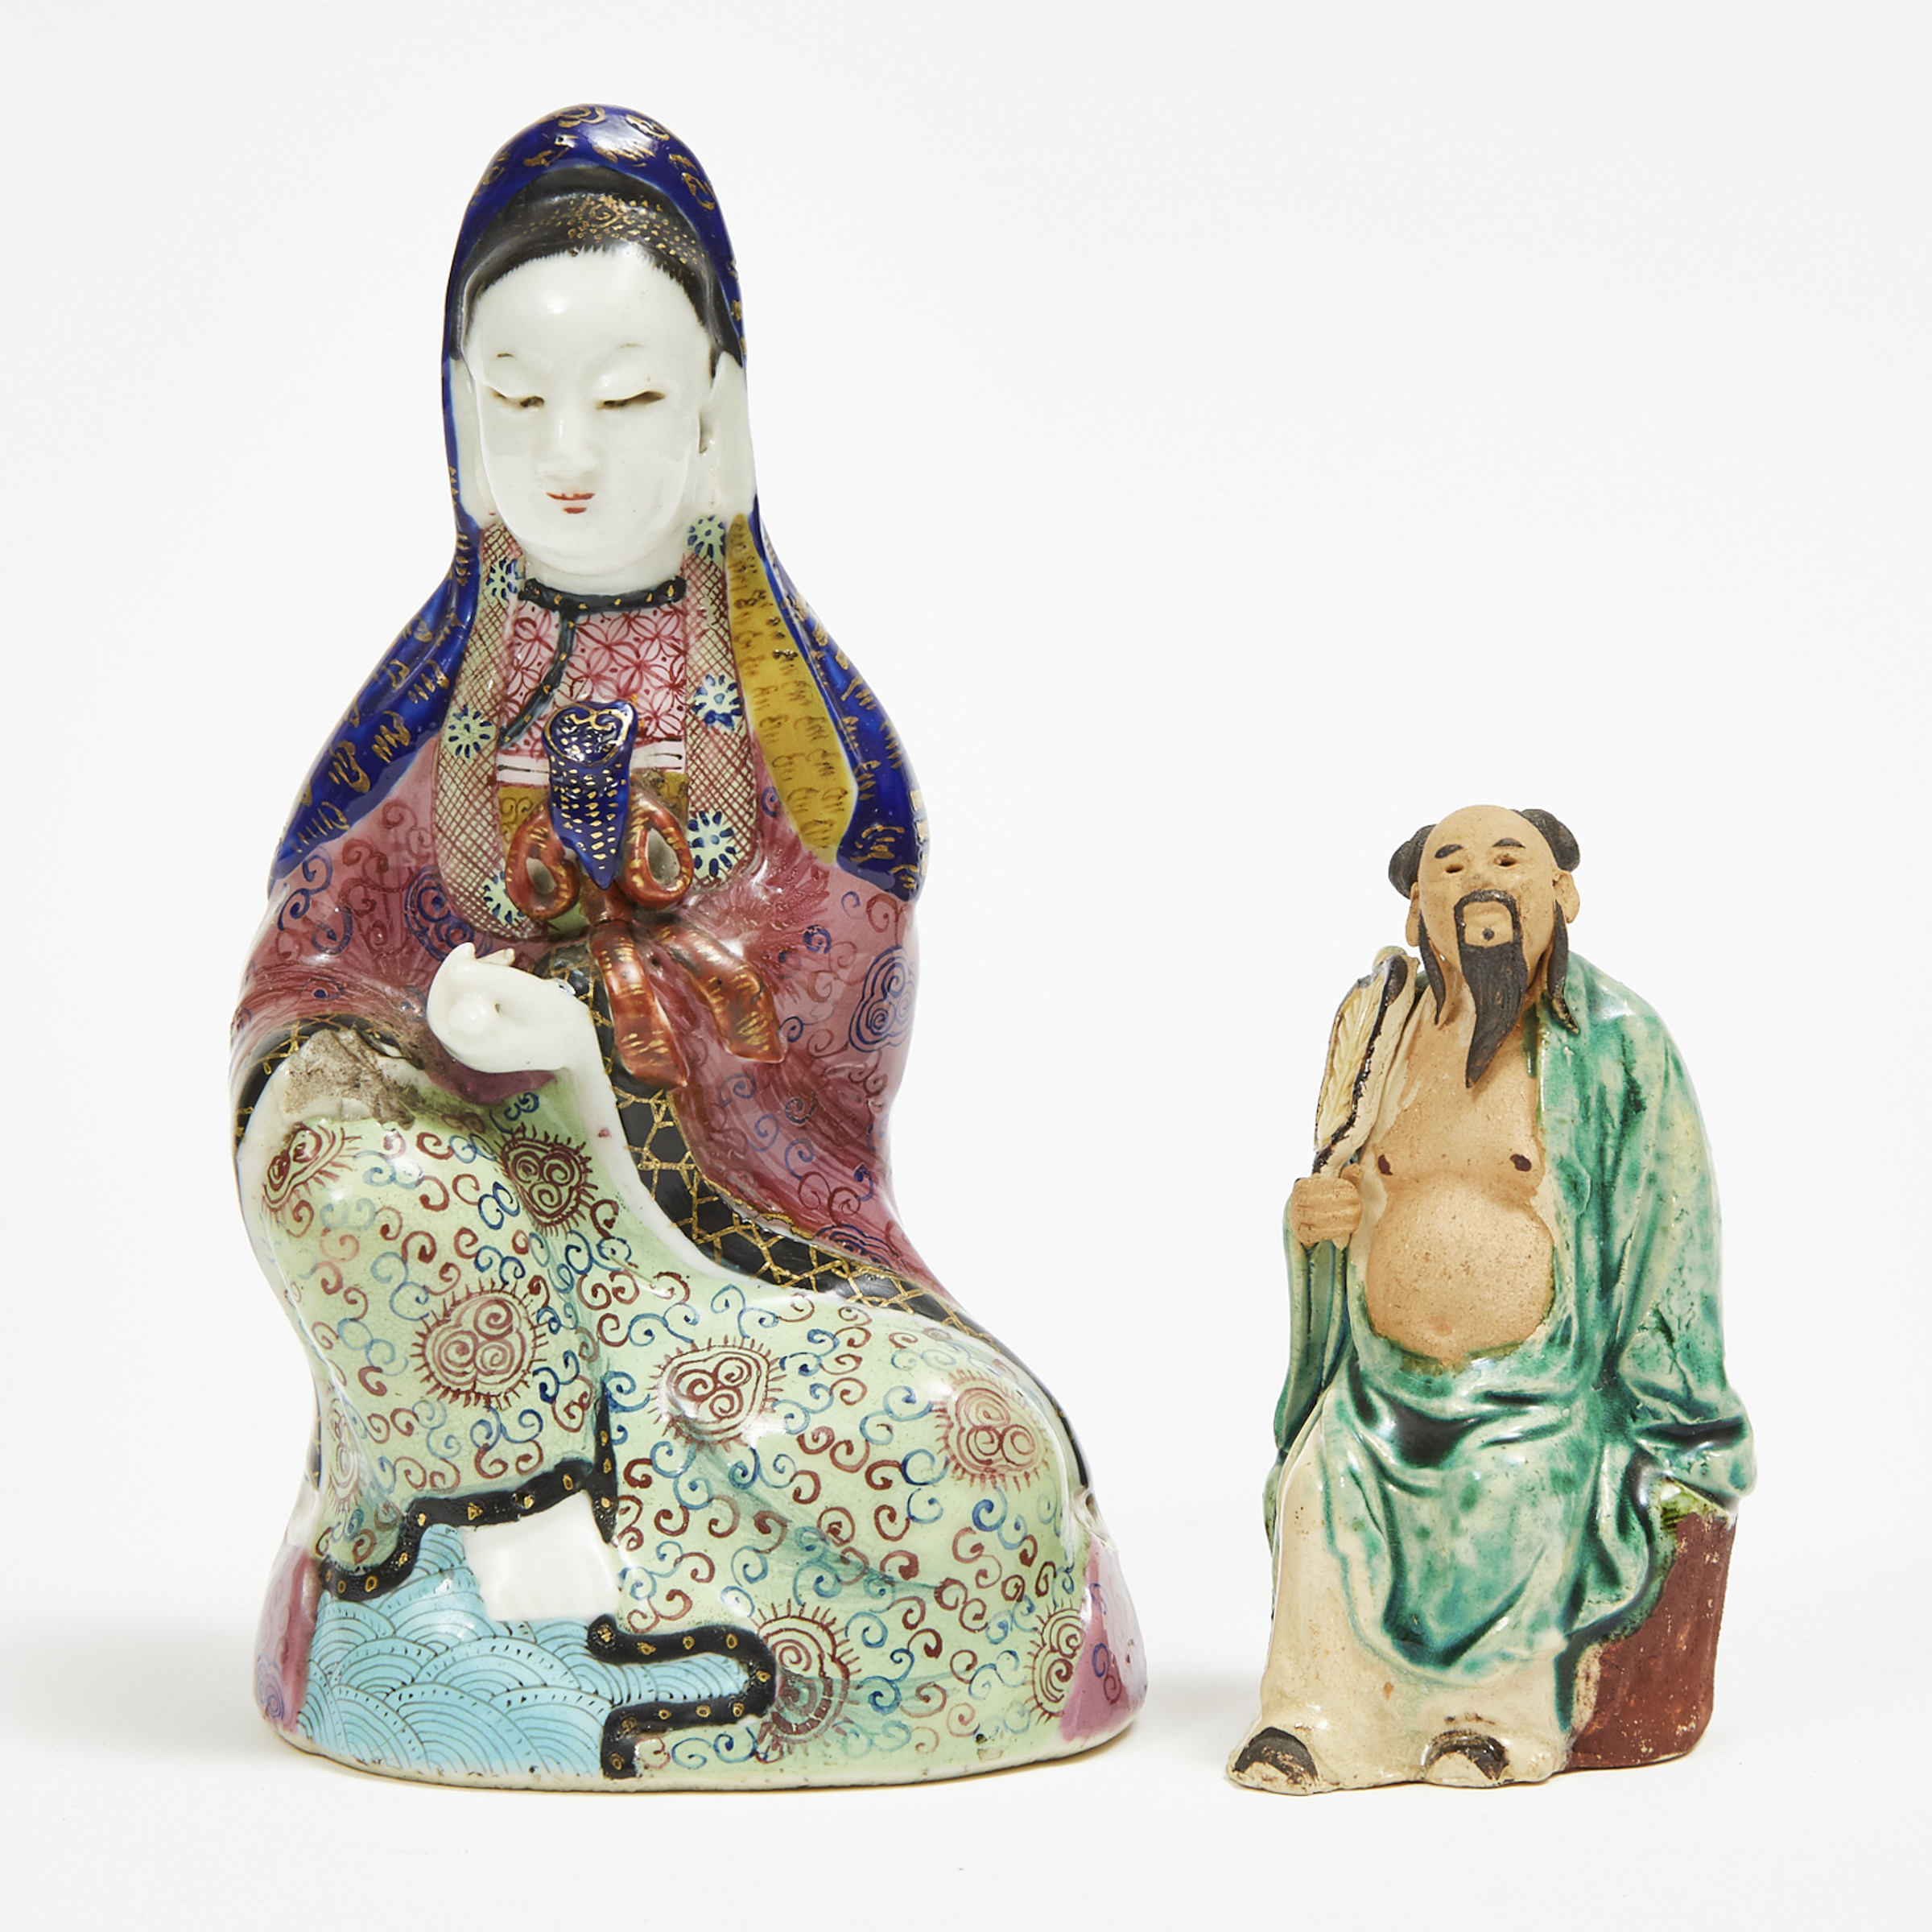 A Famille Rose Porcelain Figure of Guanyin, together with a Figure of an Immortal, Qing Dynasty and Later